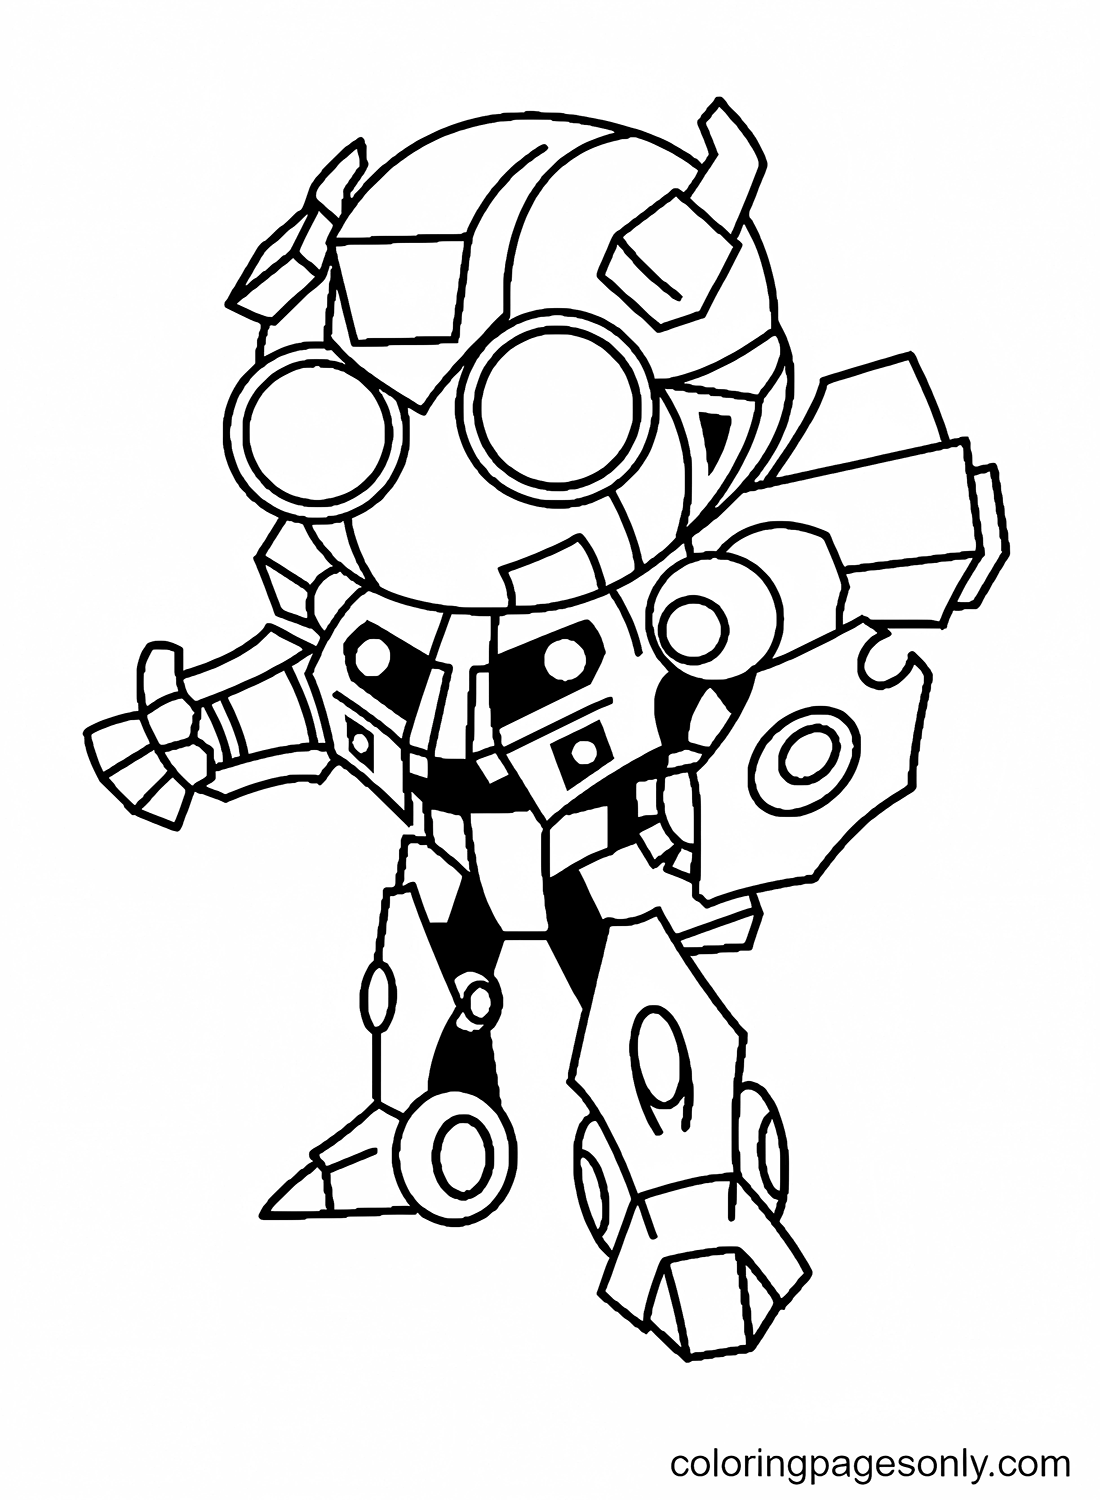 Cartoon Bumblebee Coloring Pages